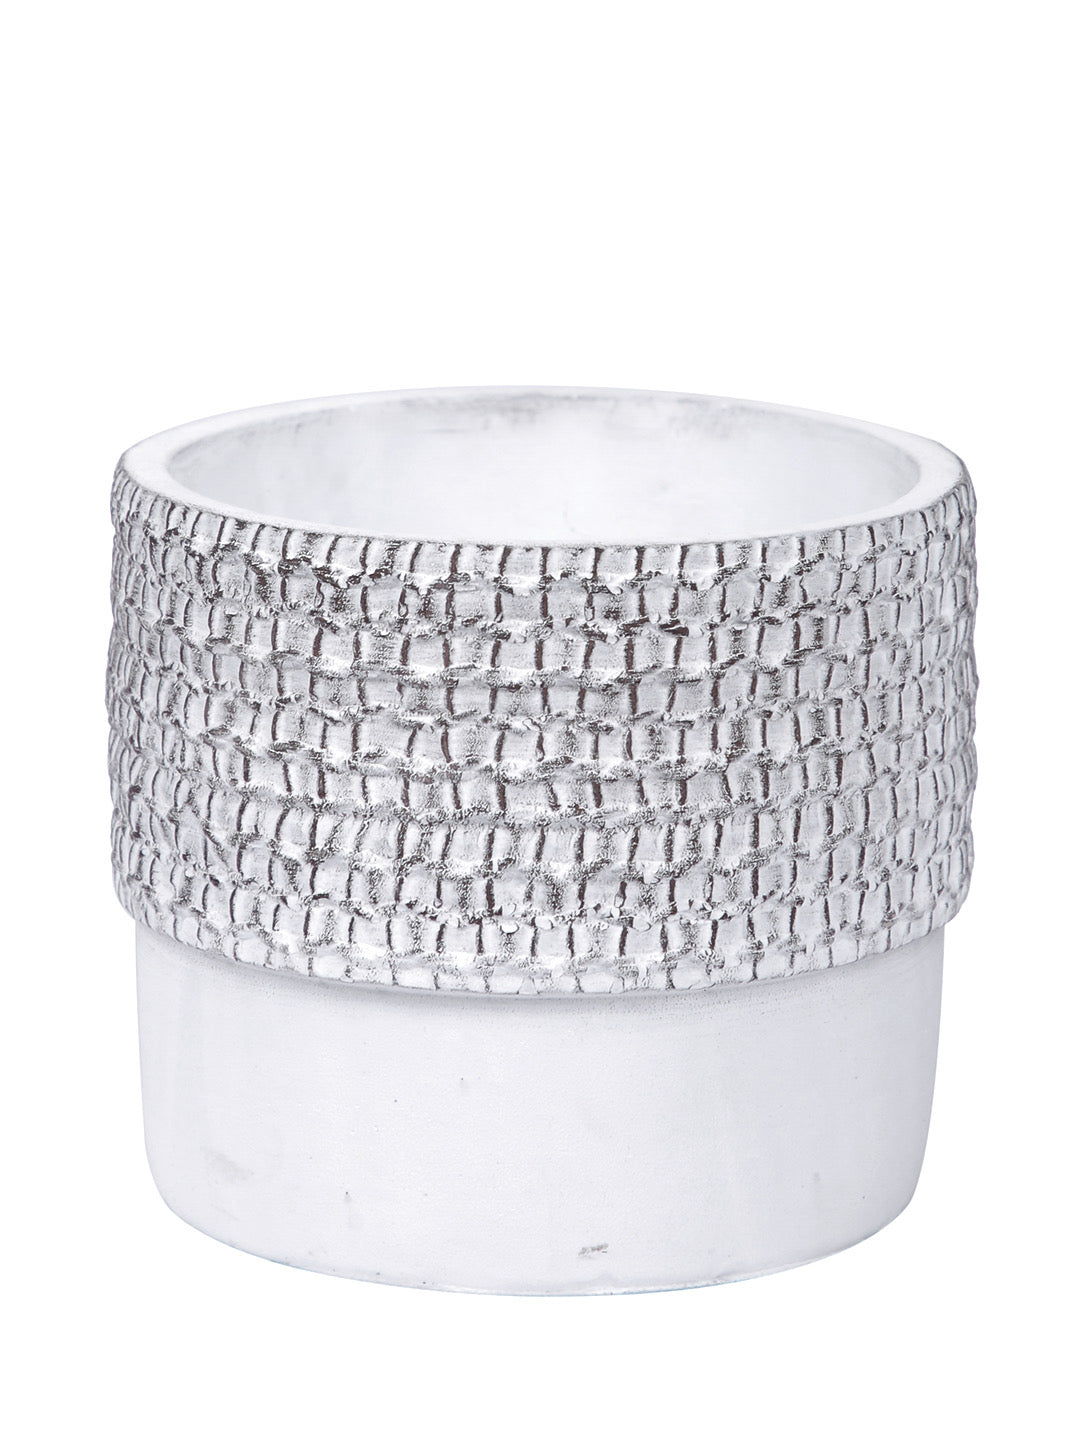 White Planter with Black Textured effect - Default Title (CHC22329BL)